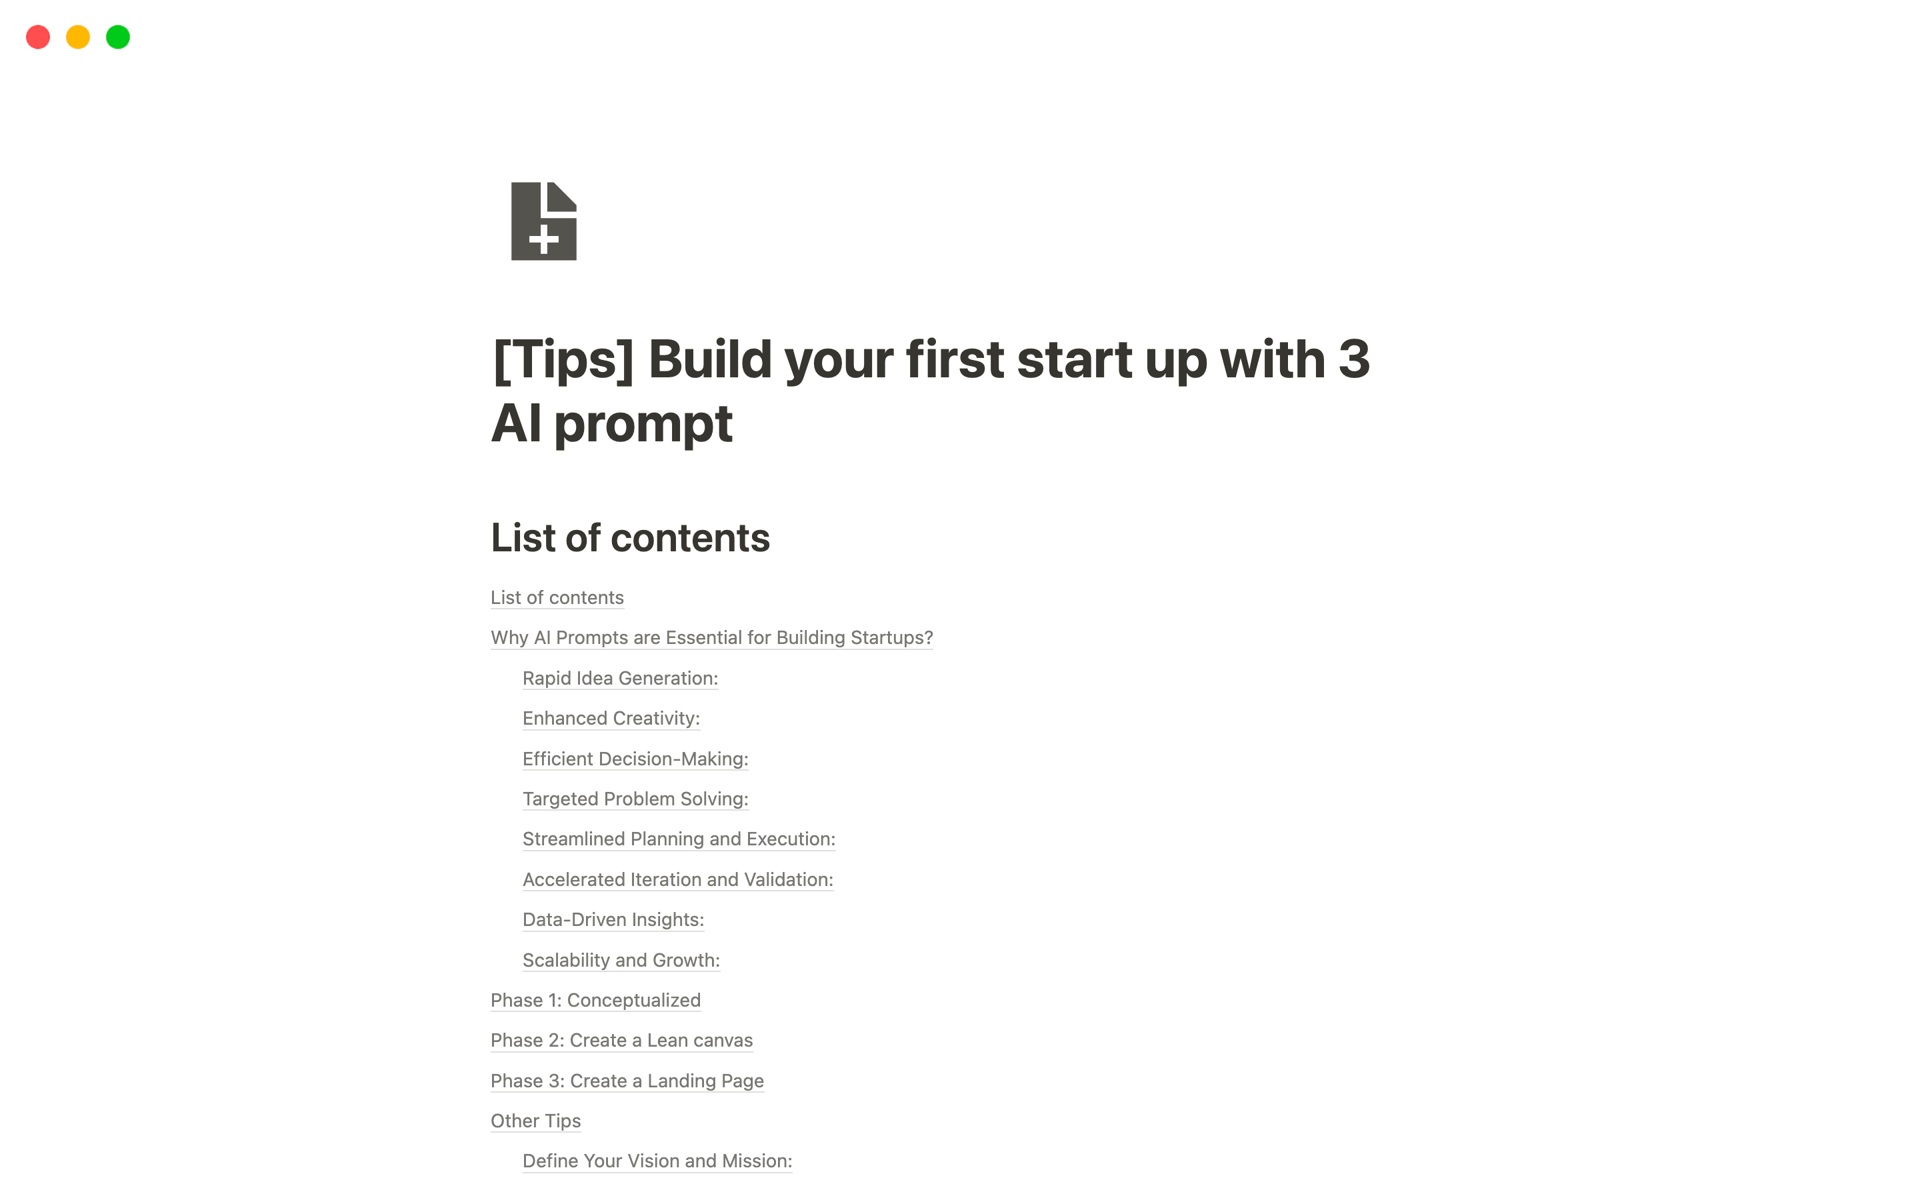 The Template provides essential AI-powered prompts and instructions for quickly building a startup, including idea generation, business modeling, landing page design, and growth strategies.